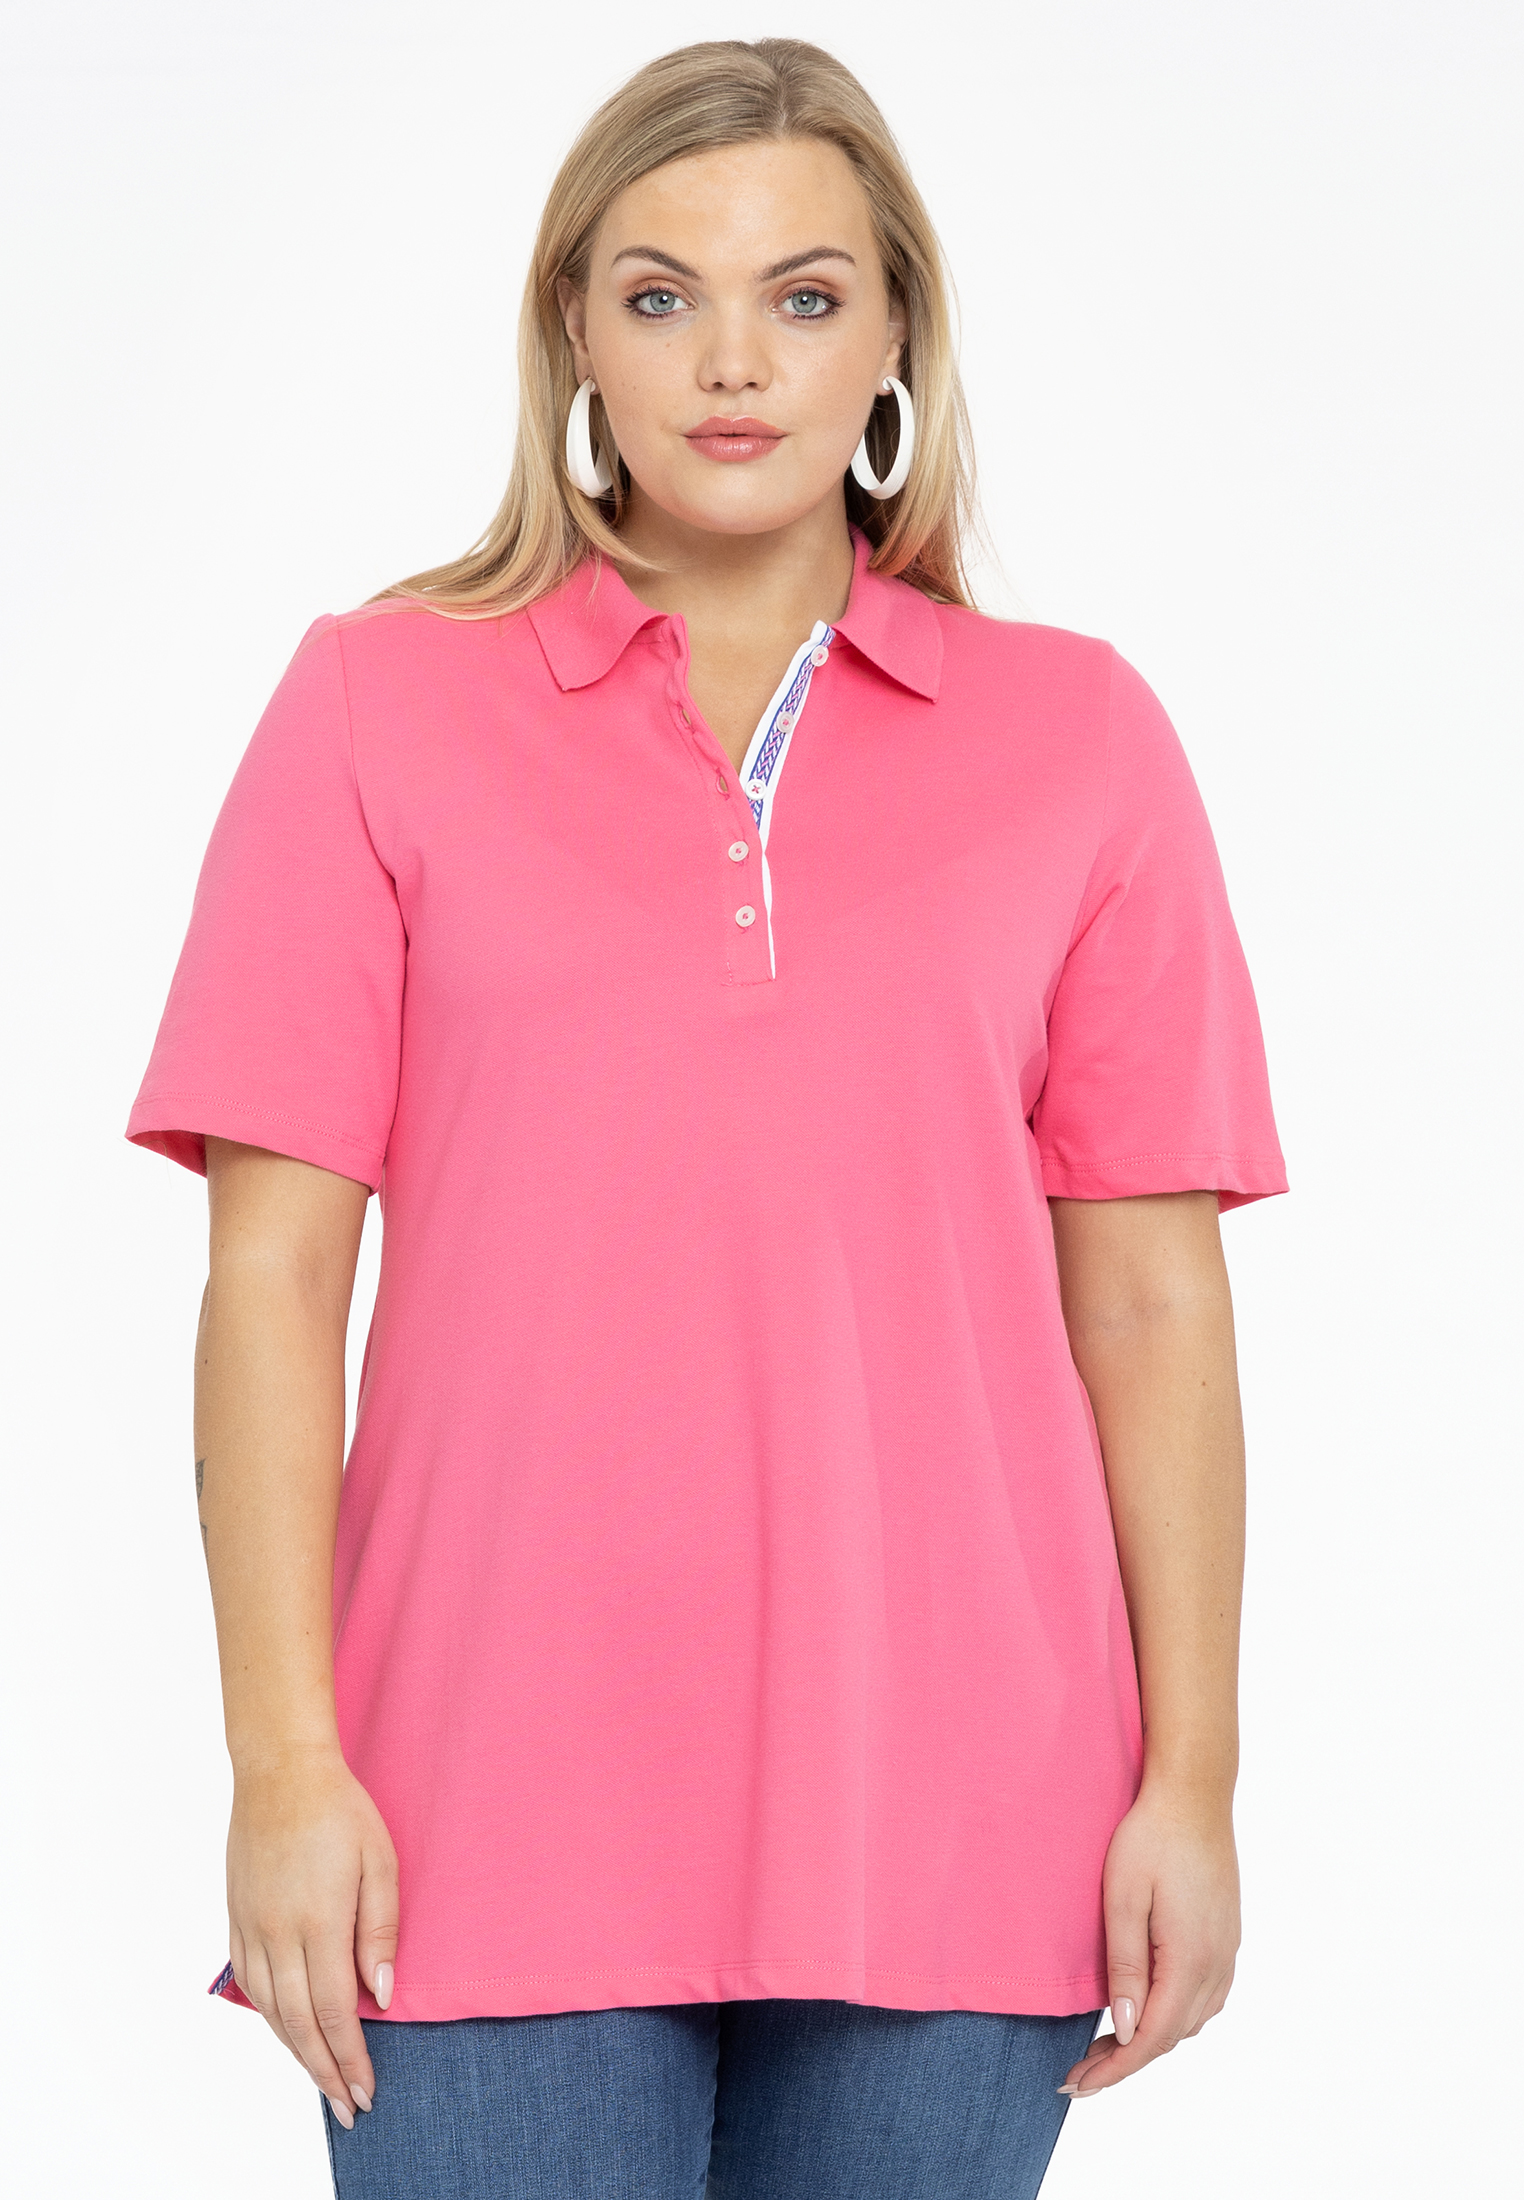 Polo-shirt flare 58/60 pink